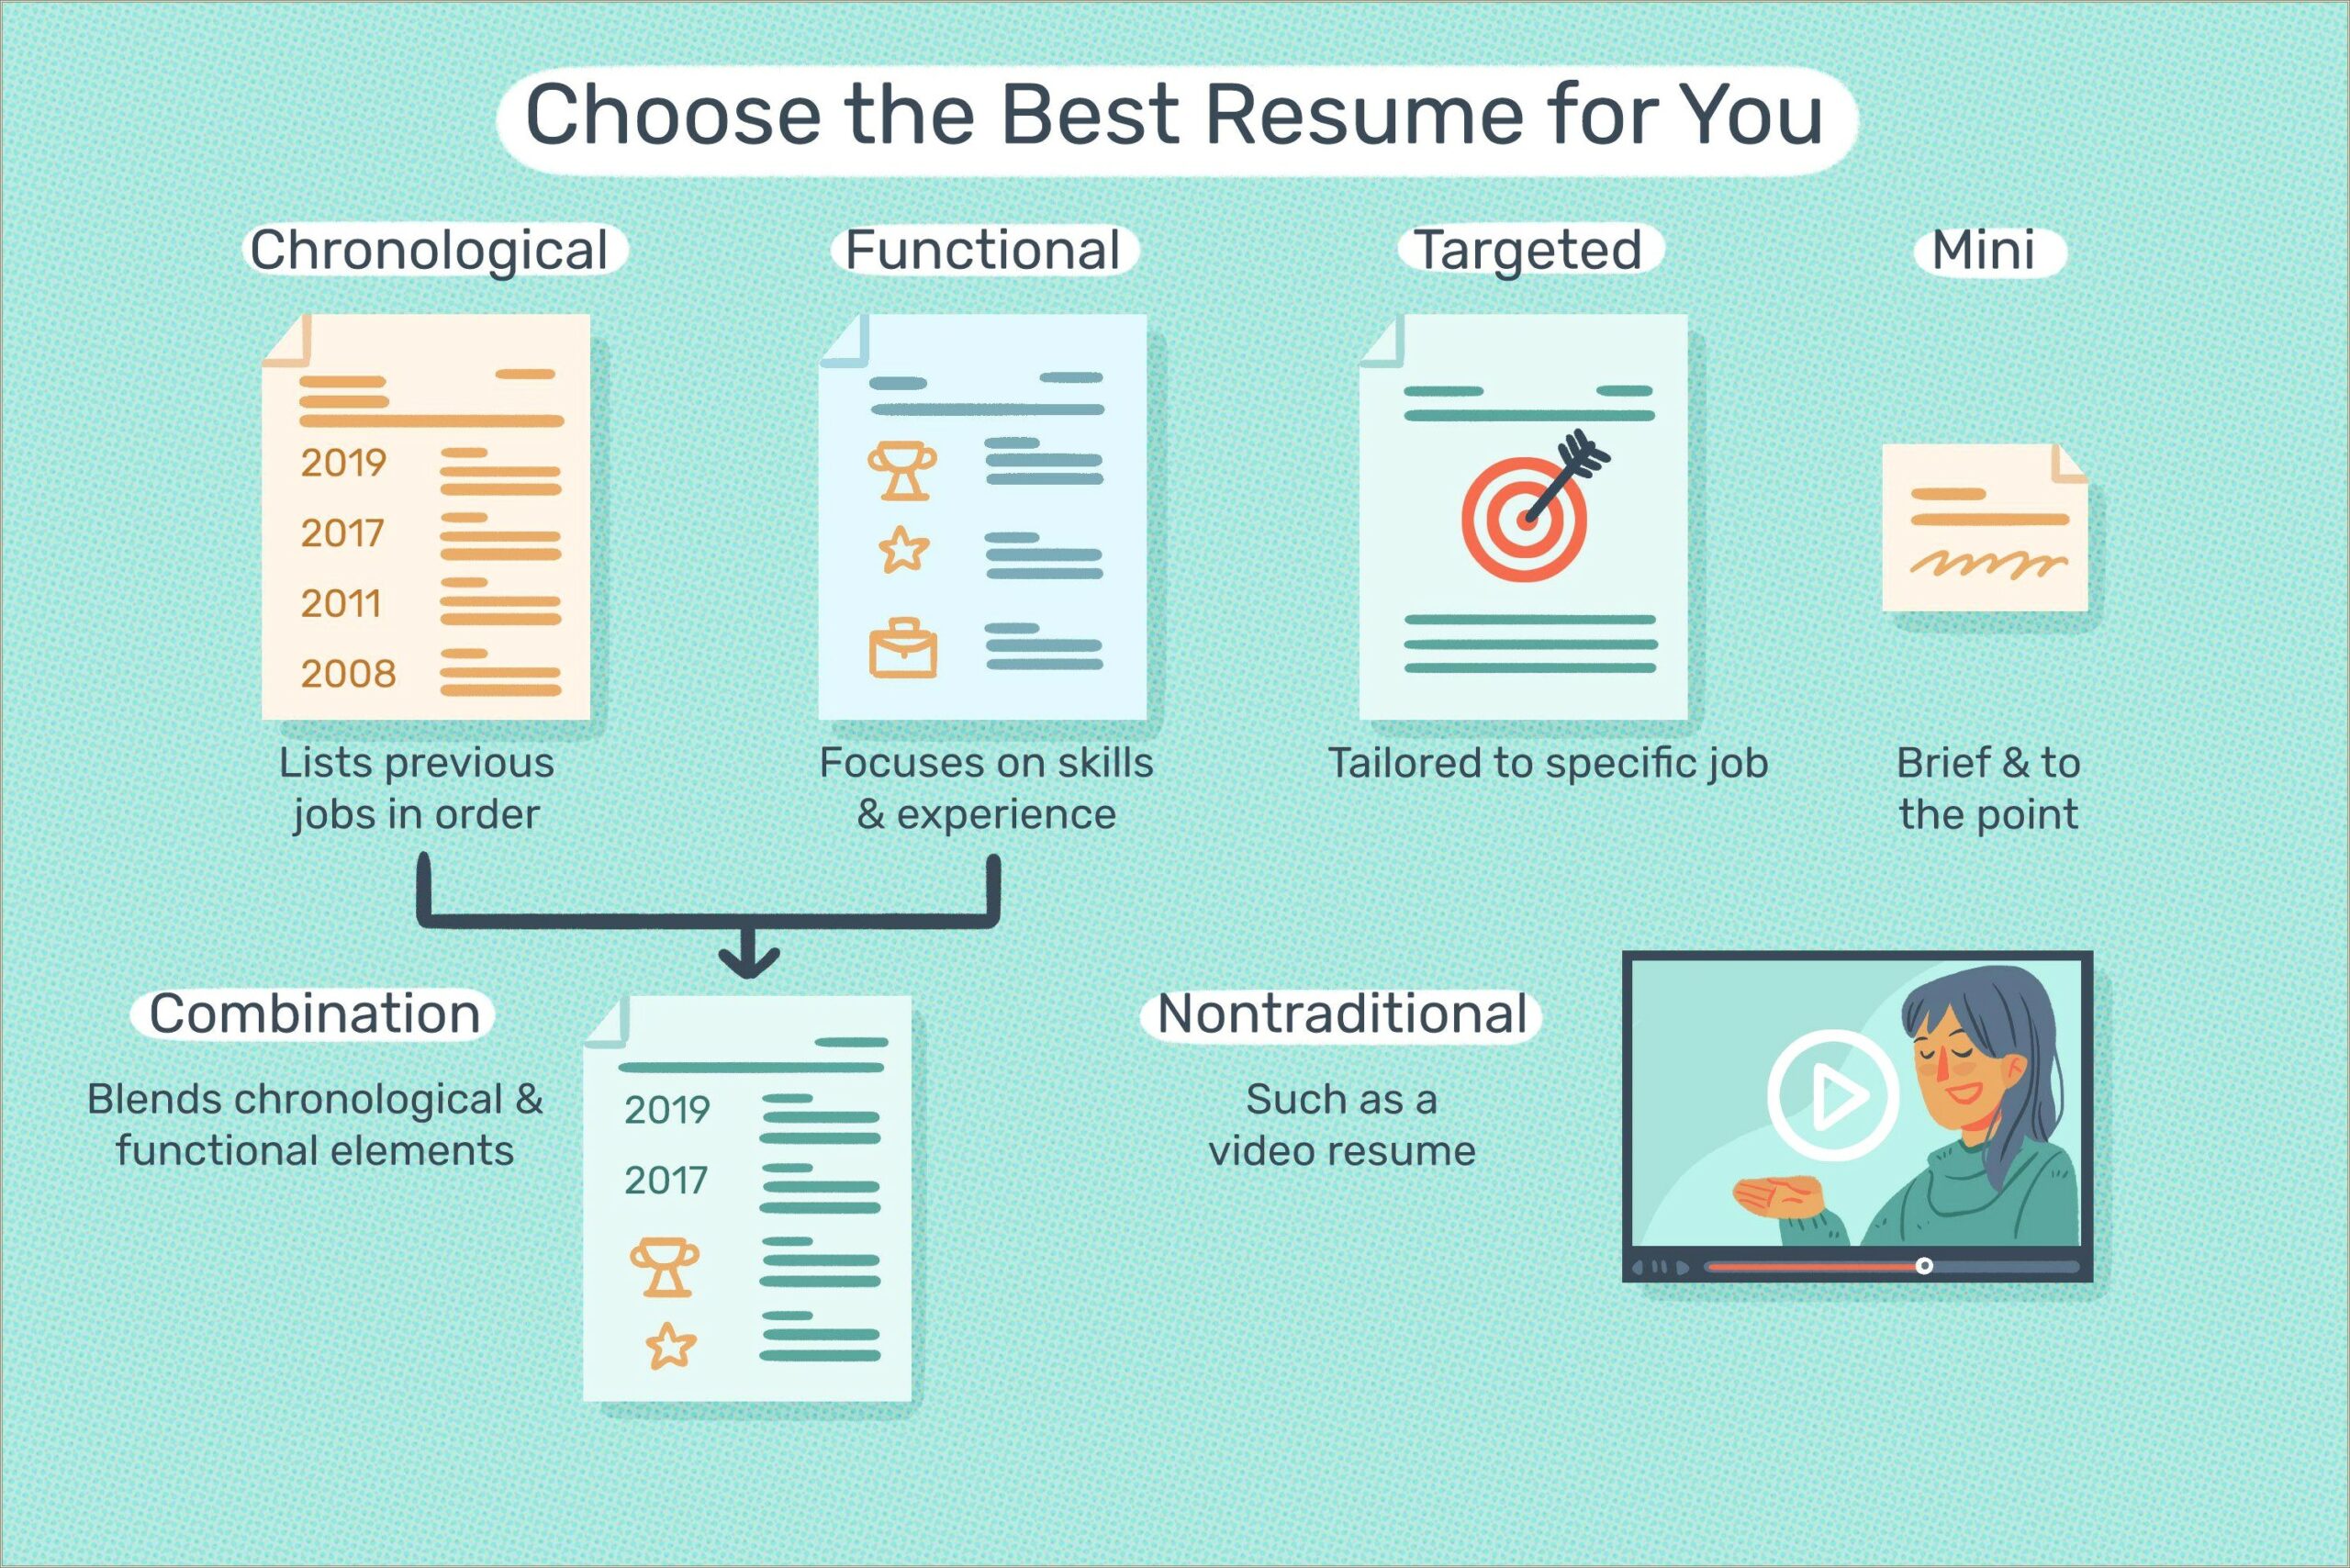 Resume Examples Fro Human Resources Jobs